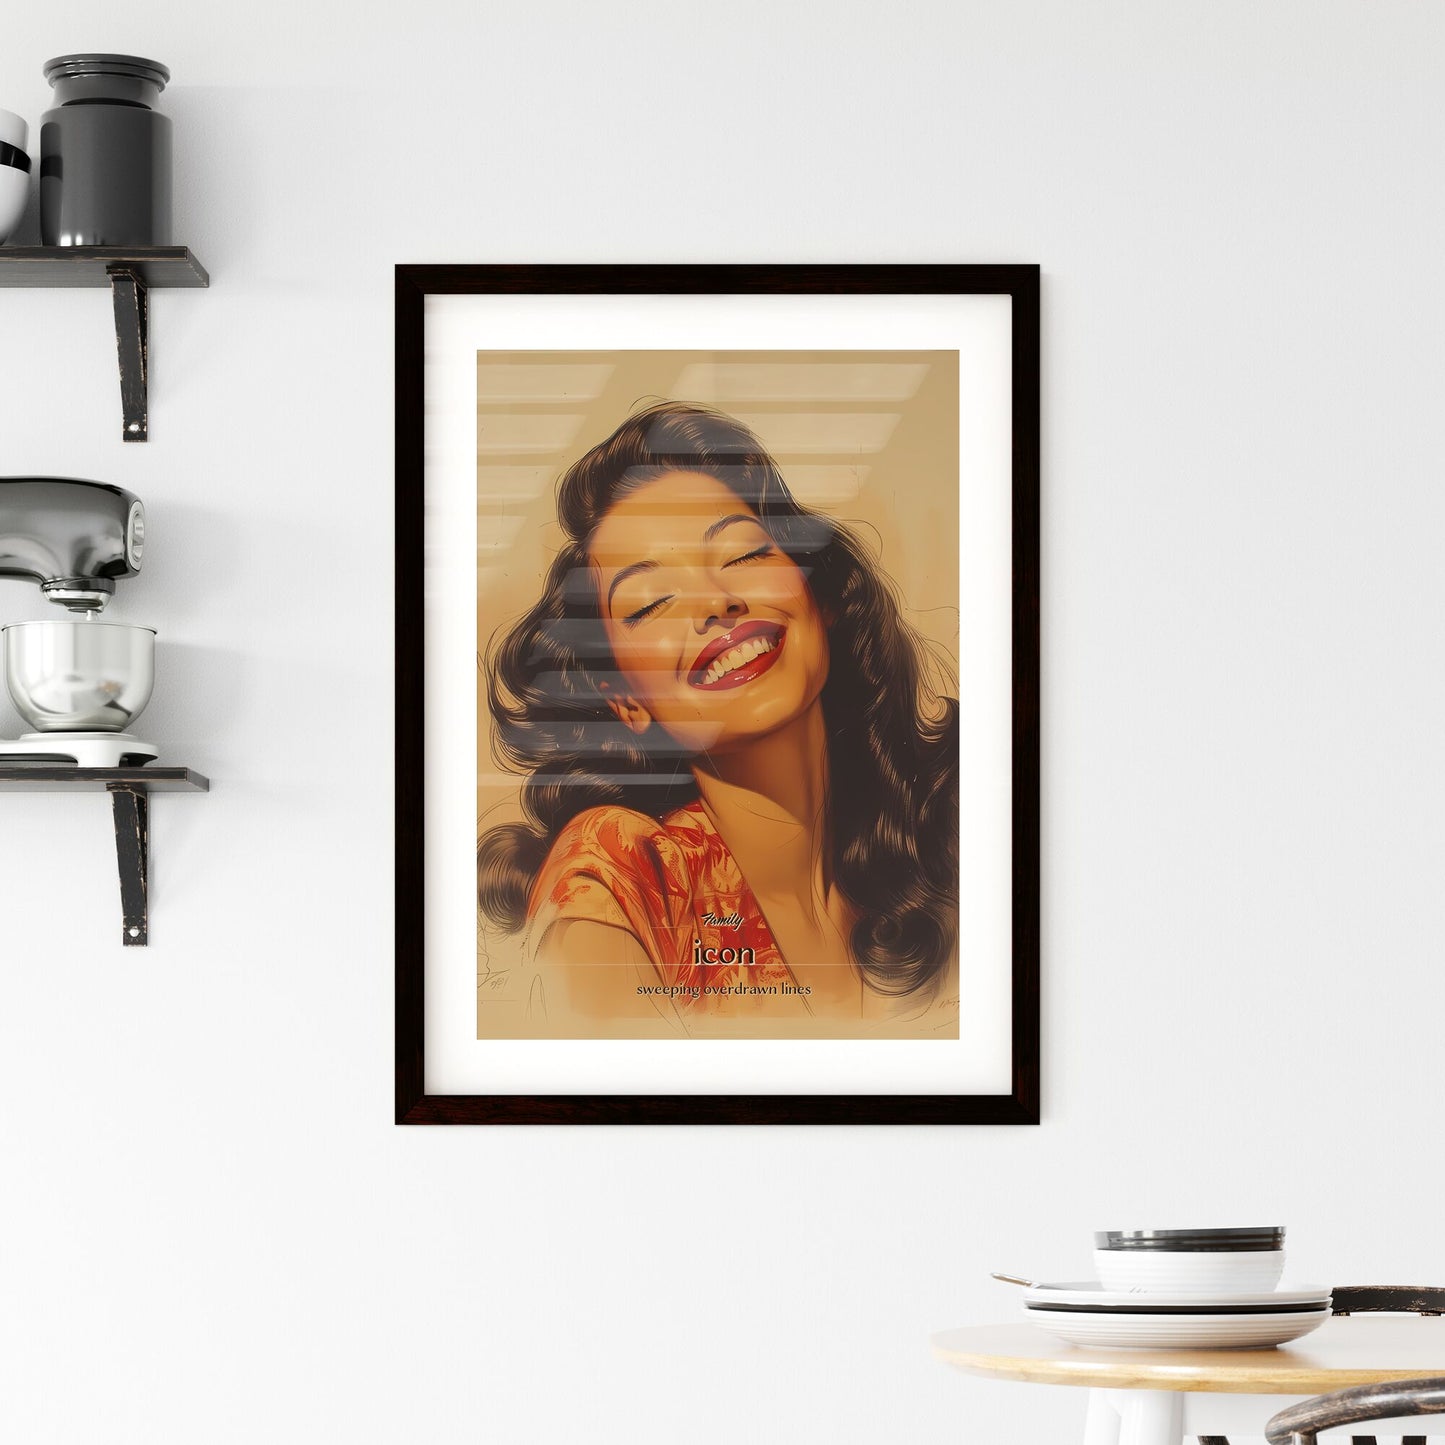 Family, icon, sweeping overdrawn lines, A Poster of a woman with long hair and red lipstick smiling Default Title